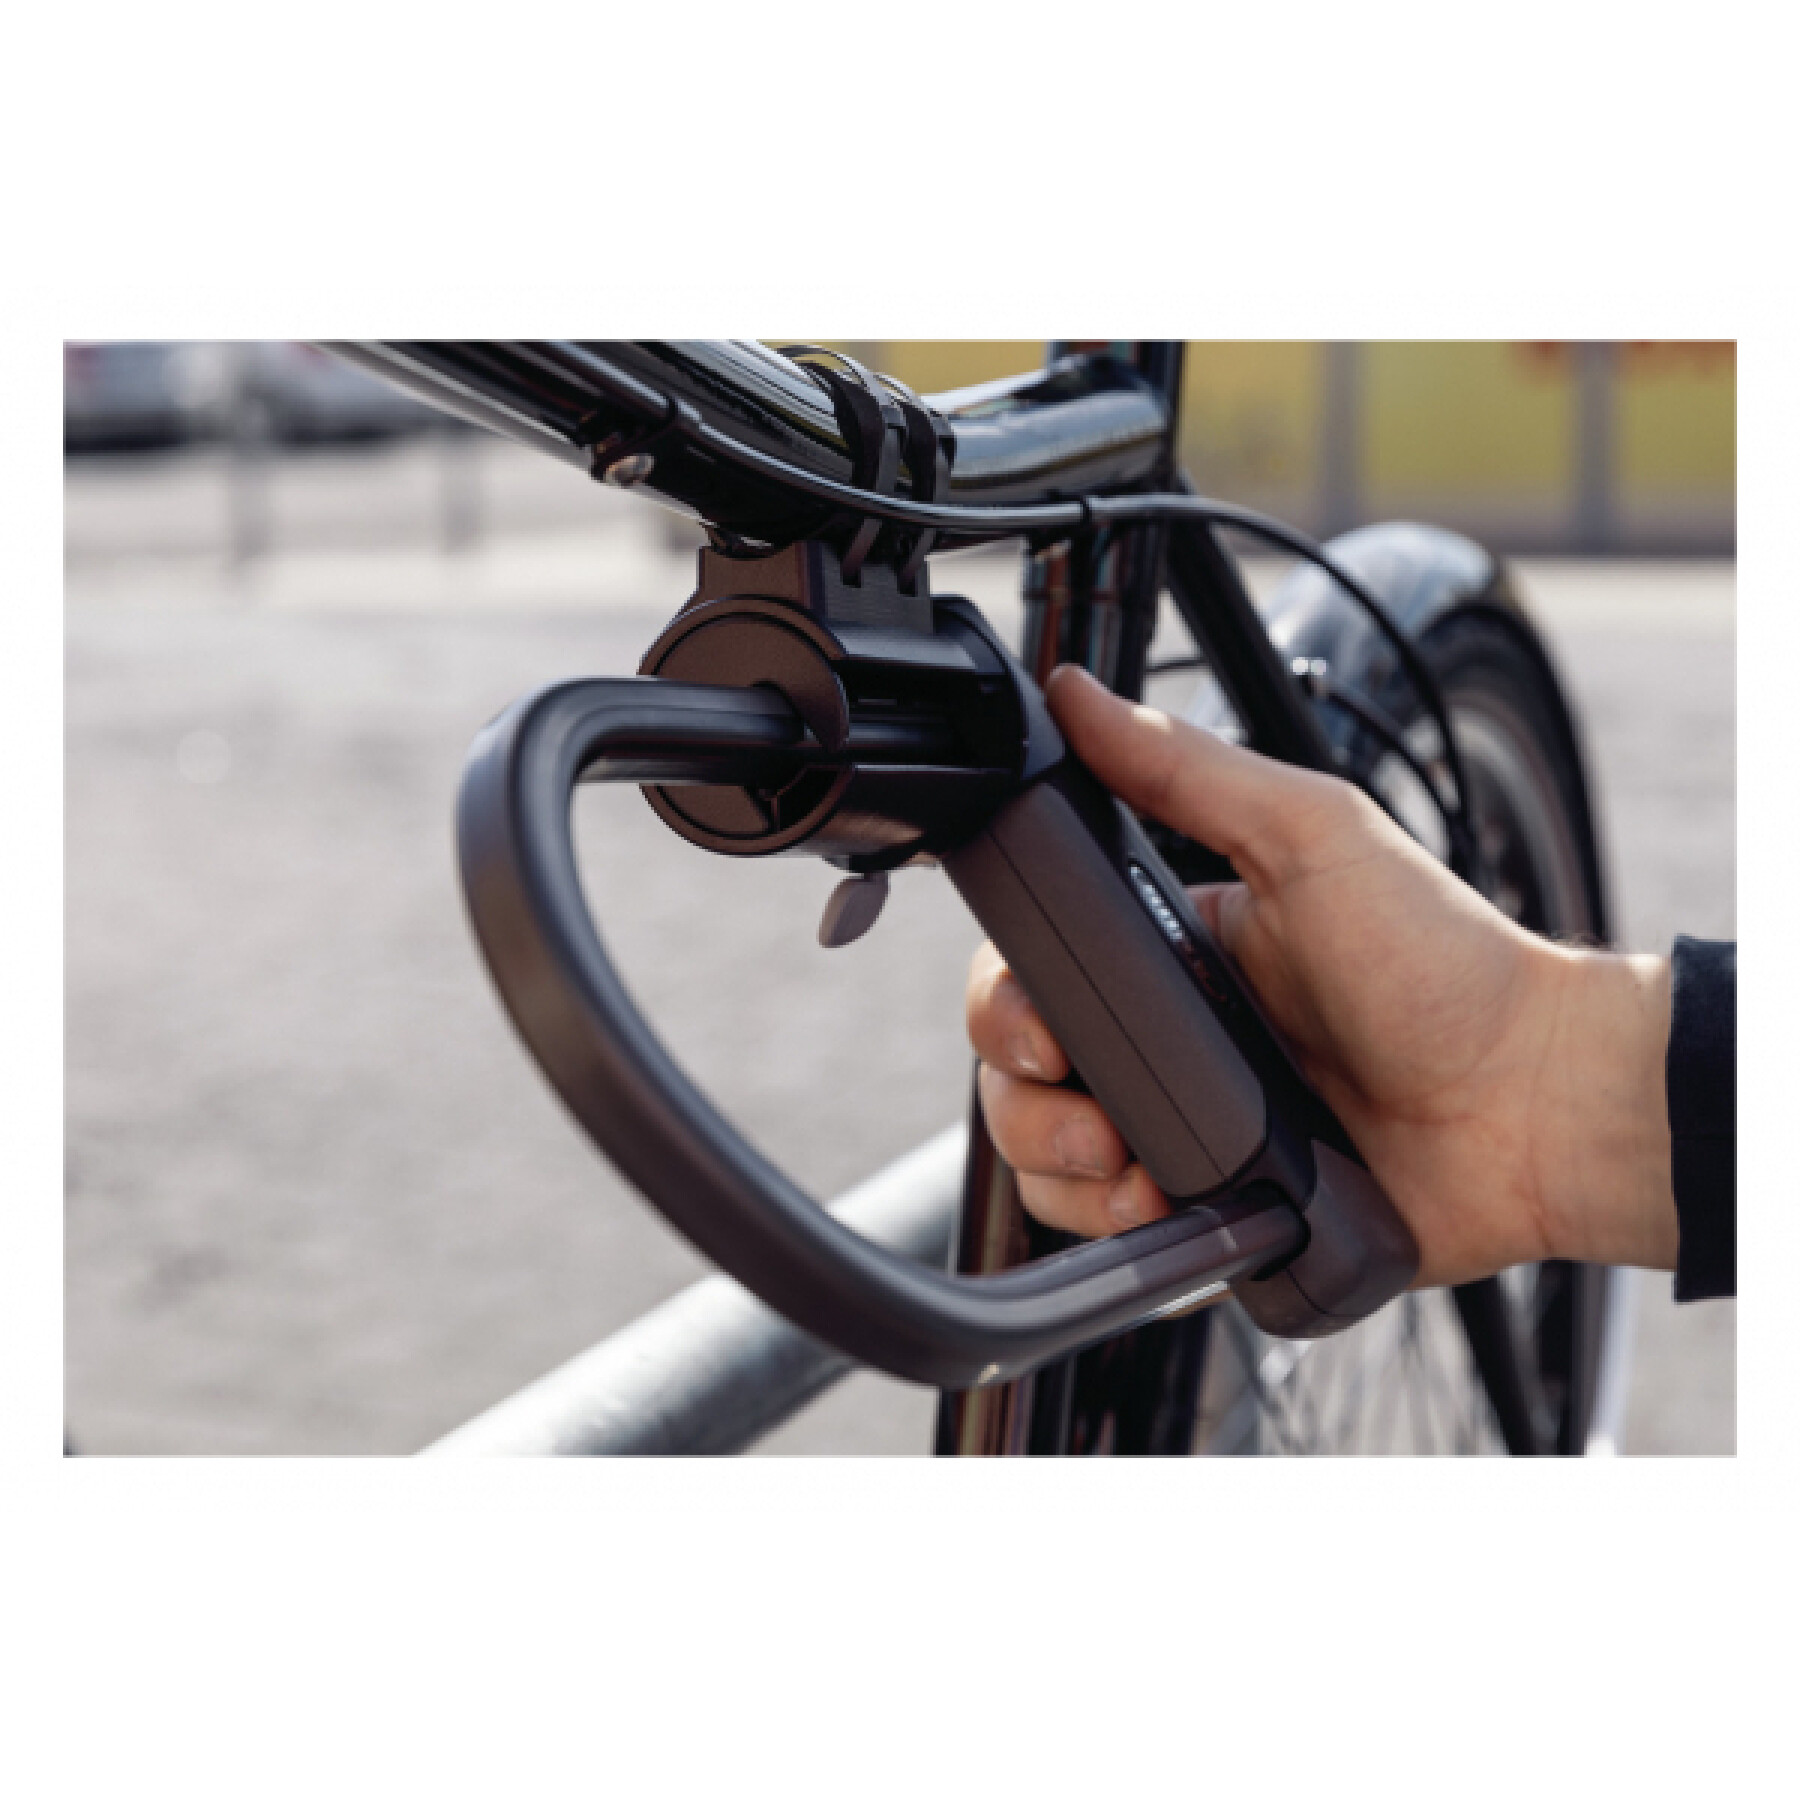 Anti-theft support Abus SHB